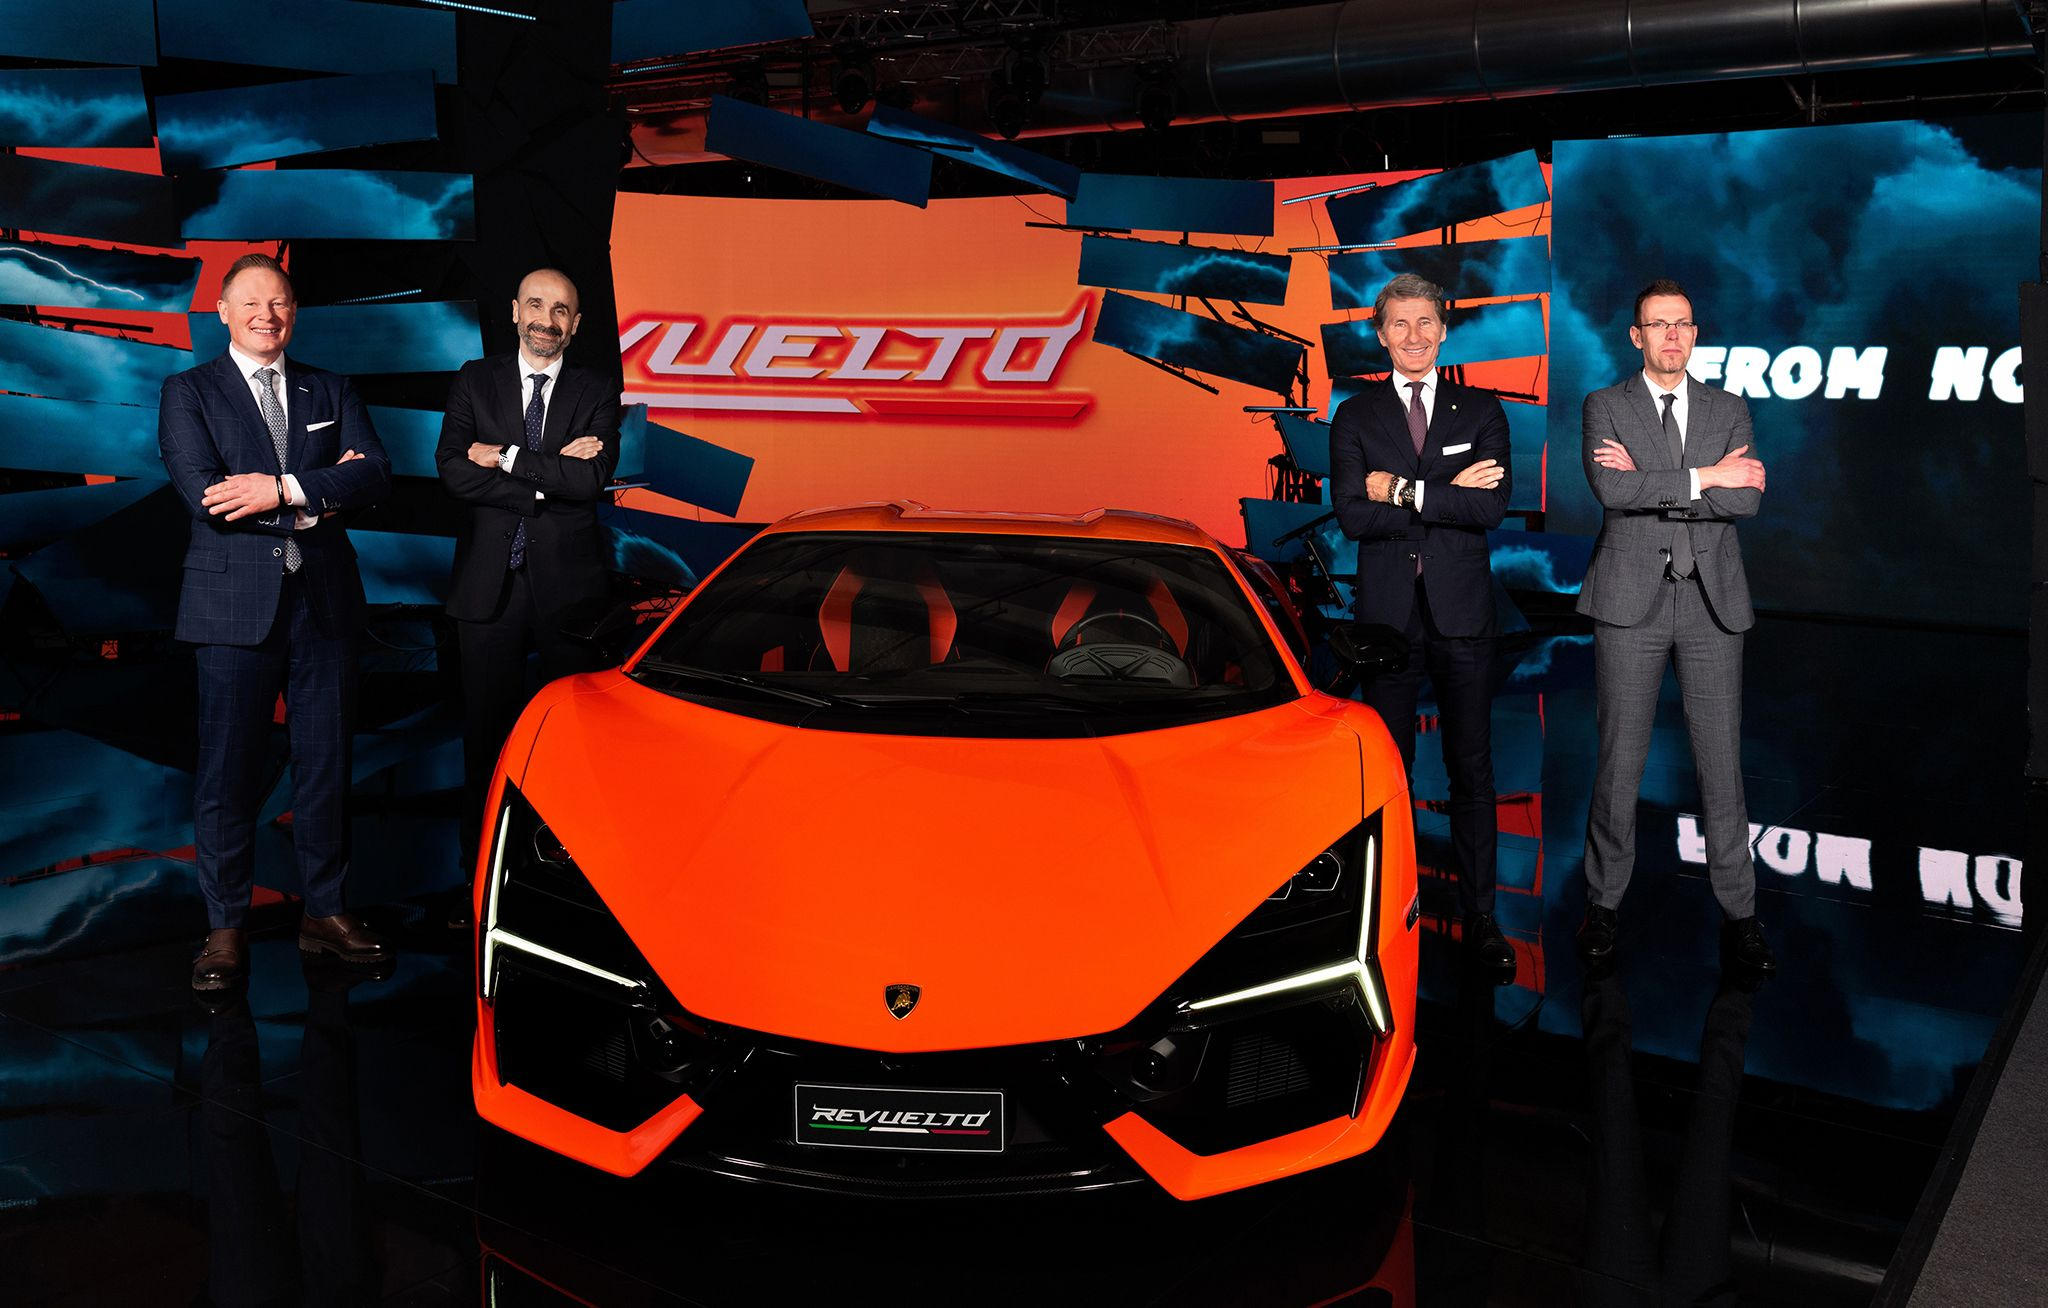 Lamborghini The first super sports V12 hybrid HPEV, unveiled to media, owners and celebrities 